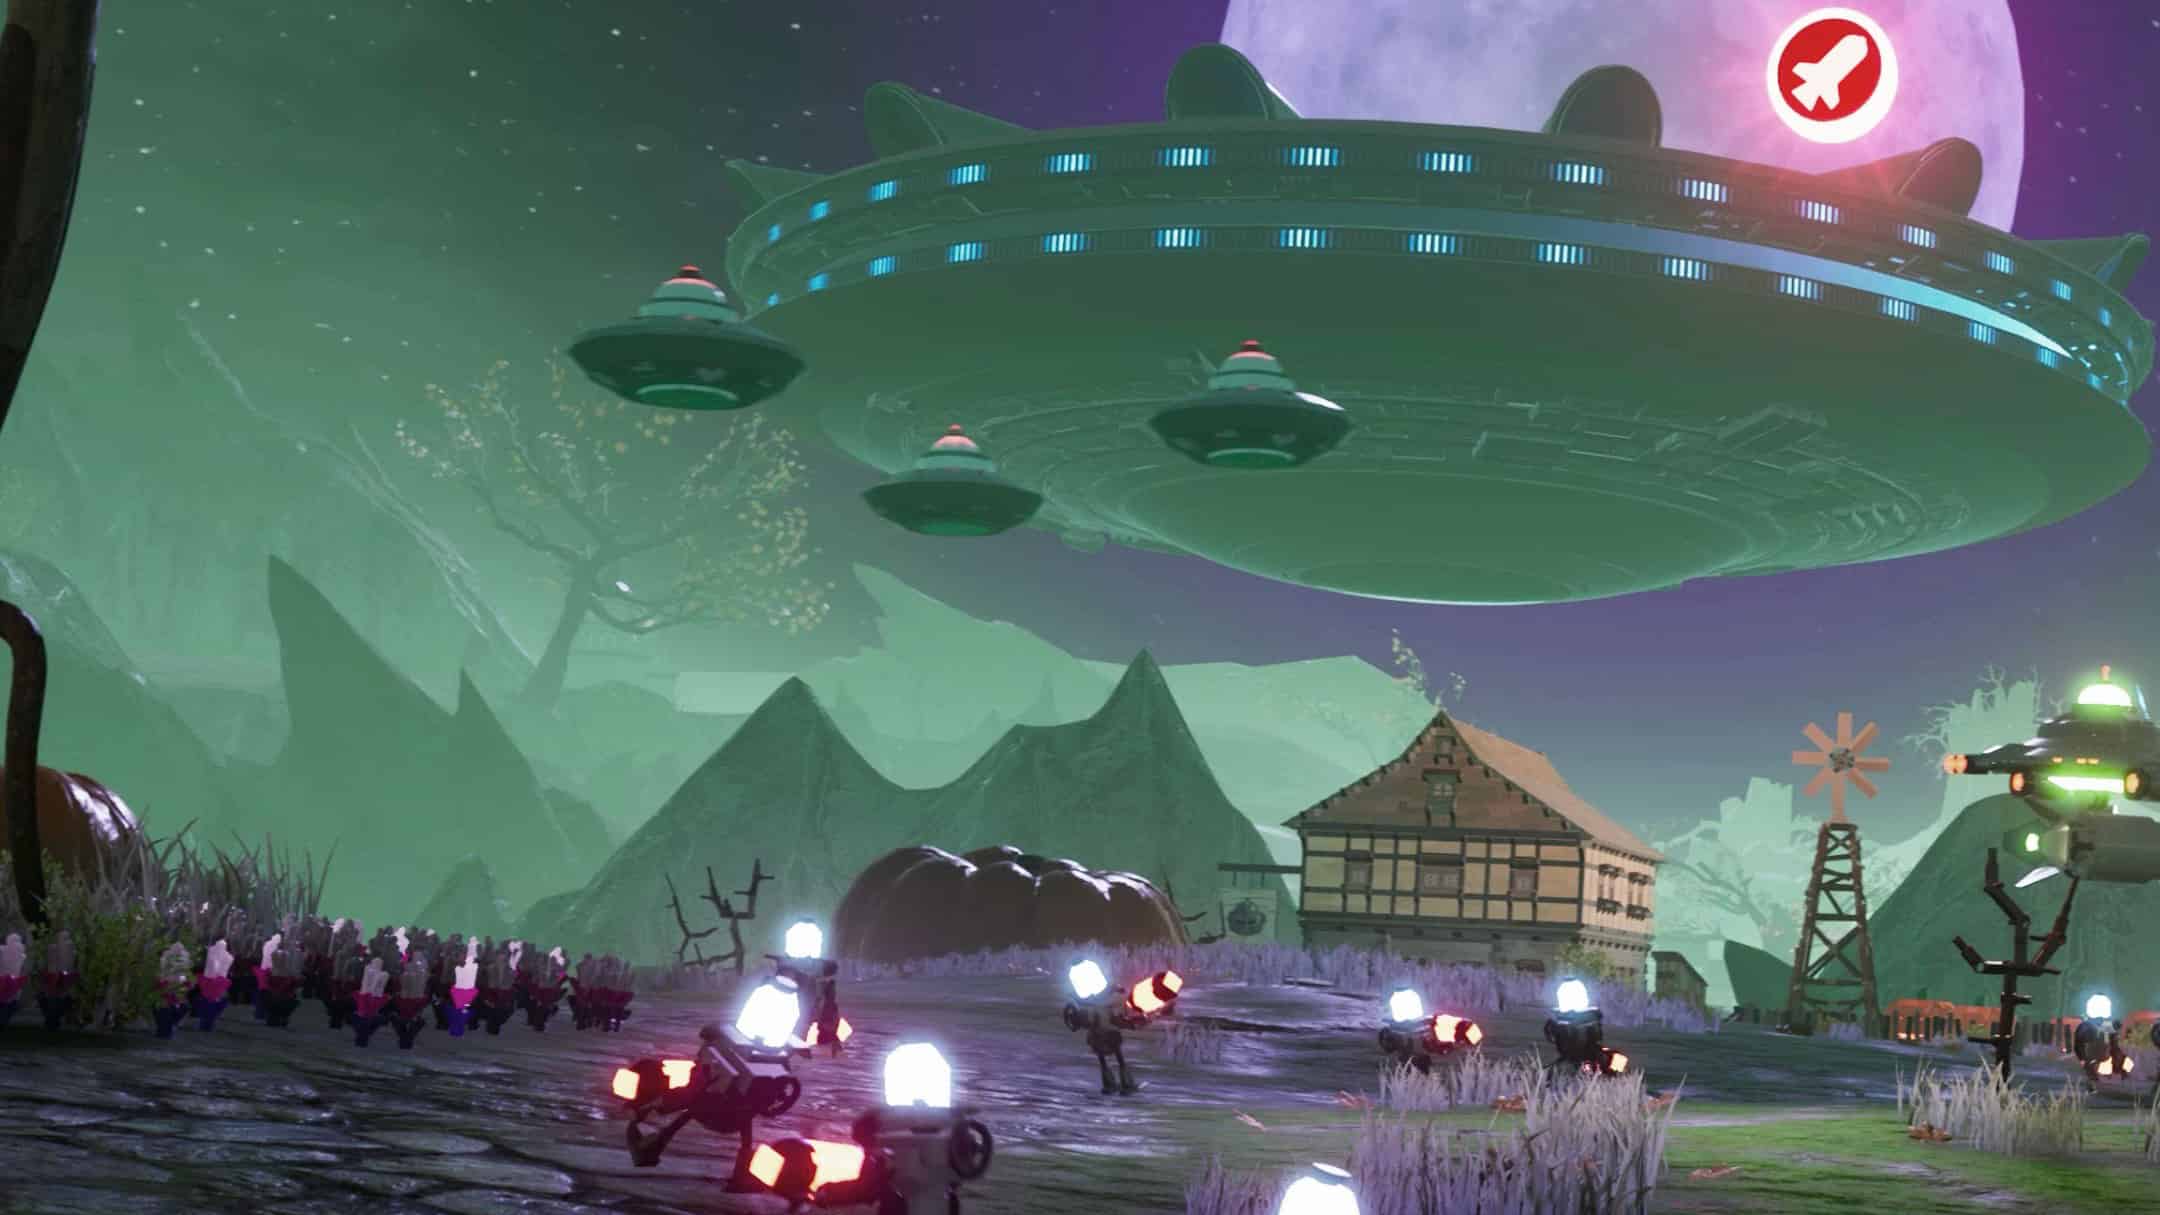 Is Lego 2K Drive on PS4 or Xbox One: An image of a Lego spaceshit hovering over an alien-themed race track.